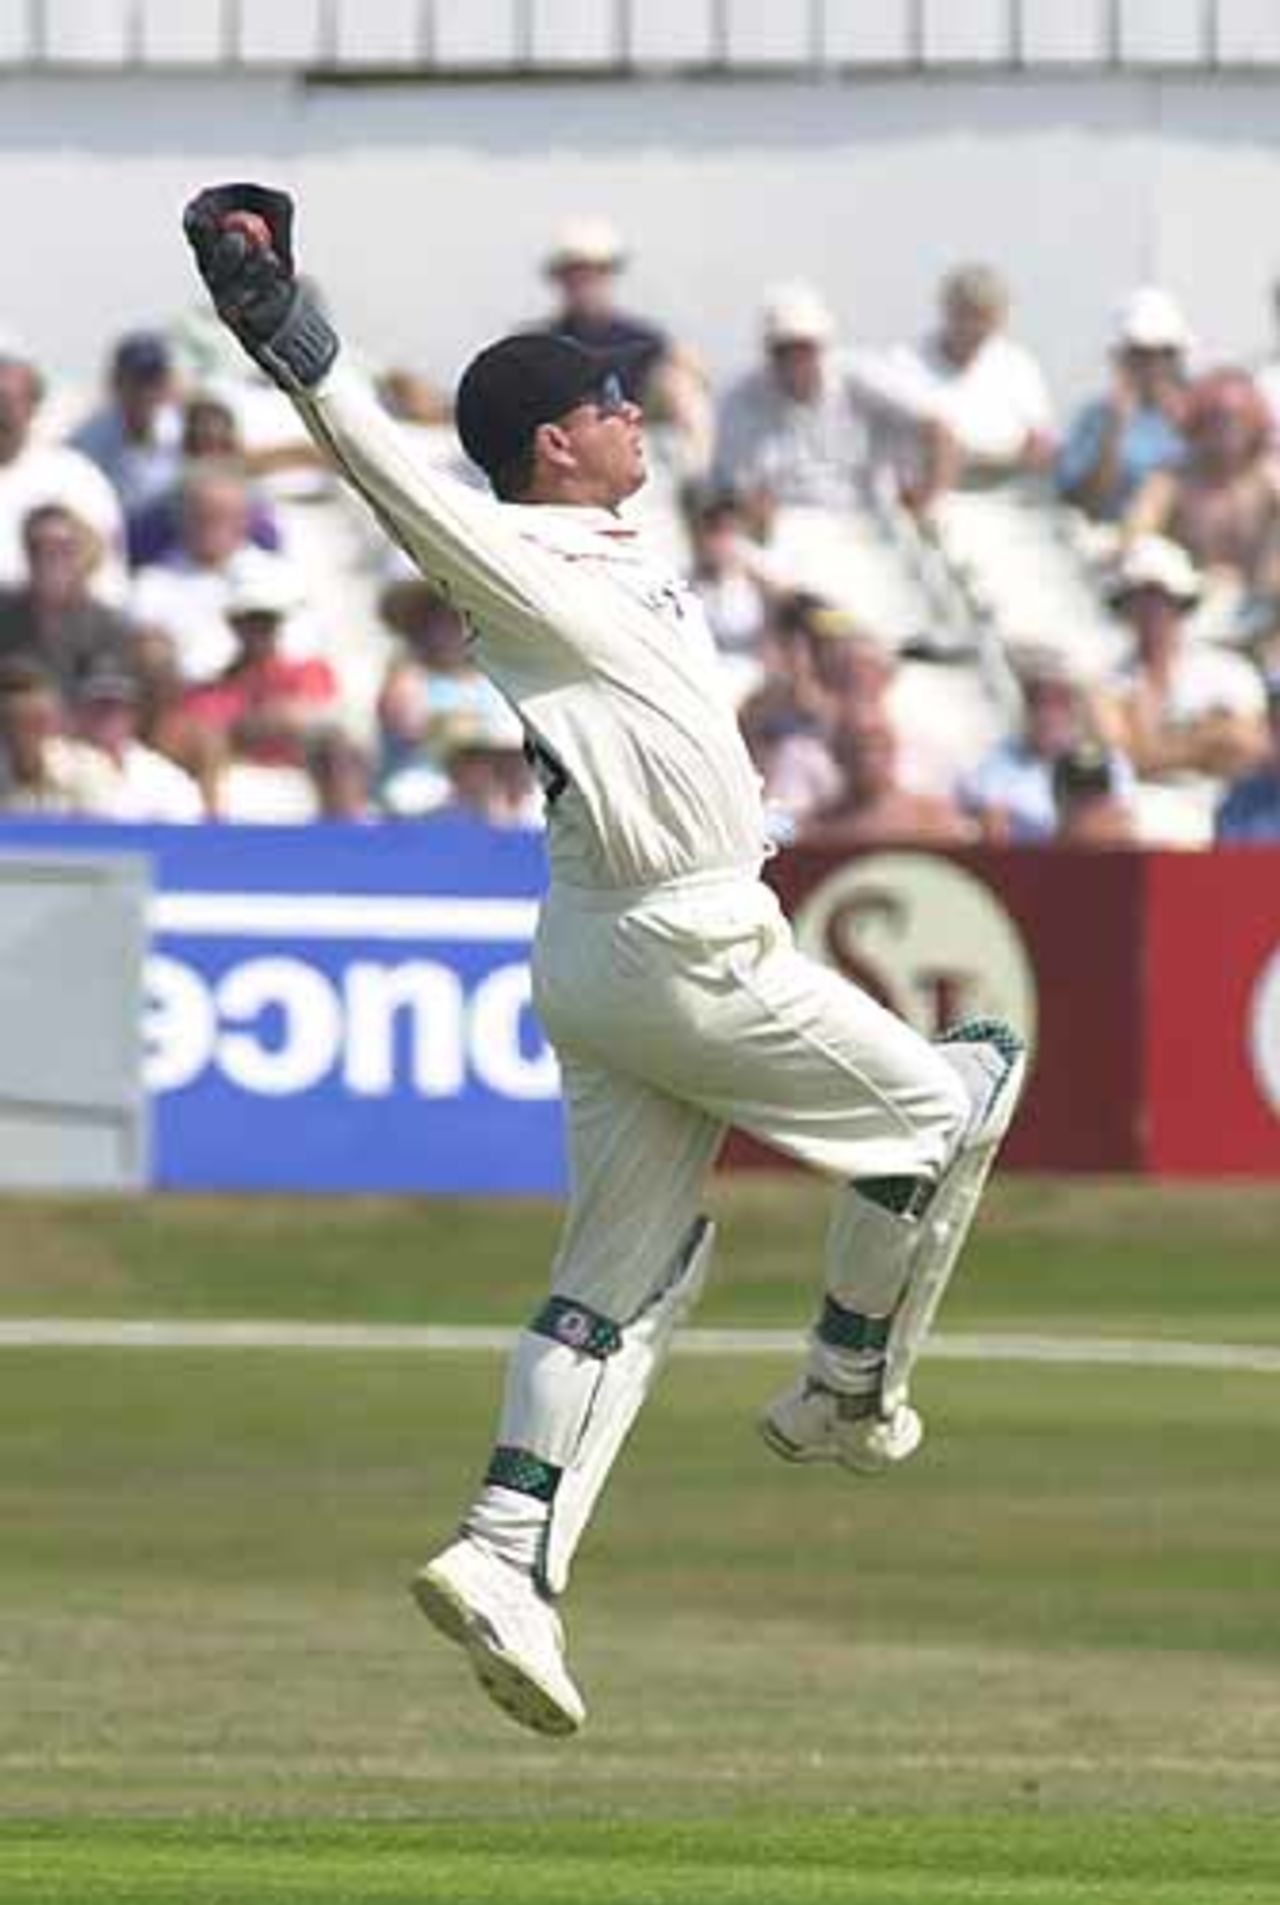 Warren Hegg in a spectacular leap to field a wayward return from the deep, 29th July 2001